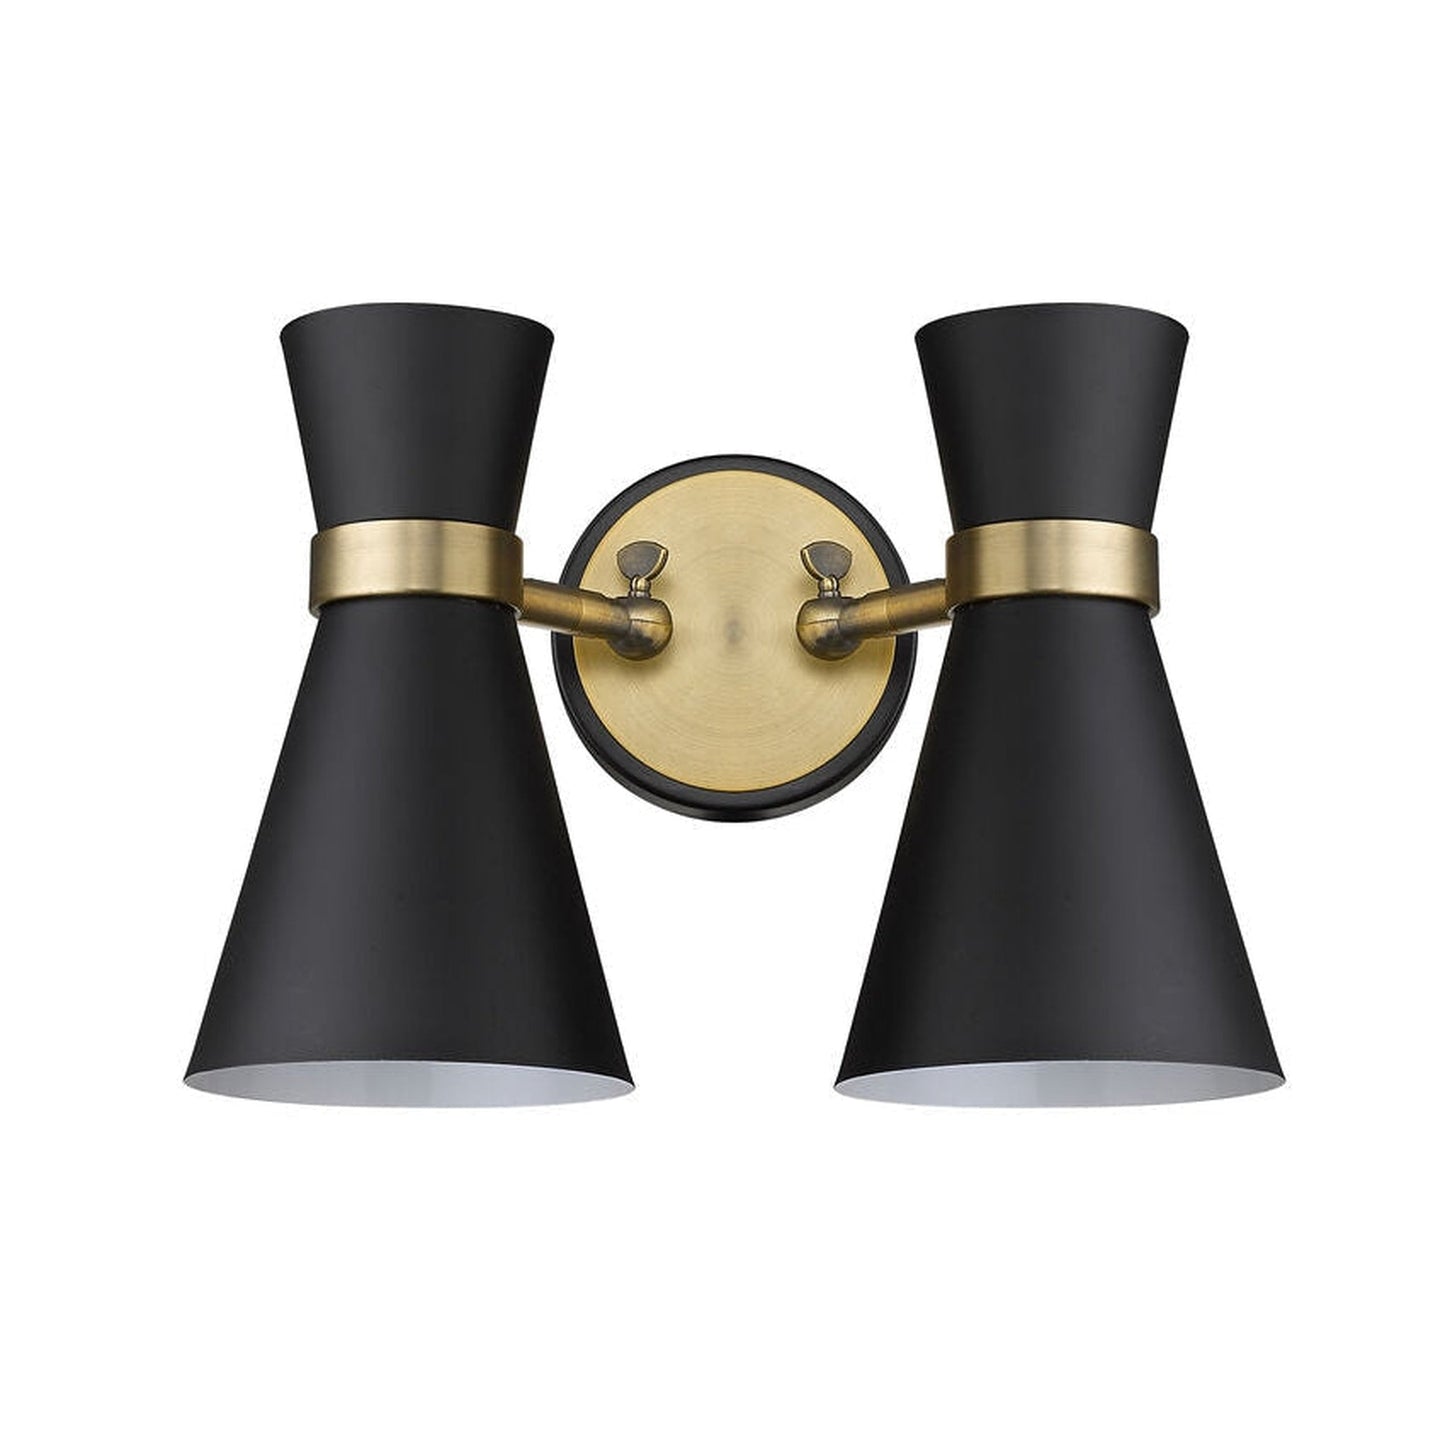 Z-Lite Soriano 12" 2-Light Matte Black and Heritage Brass Wall Sconce With Matte Black Metal Shade